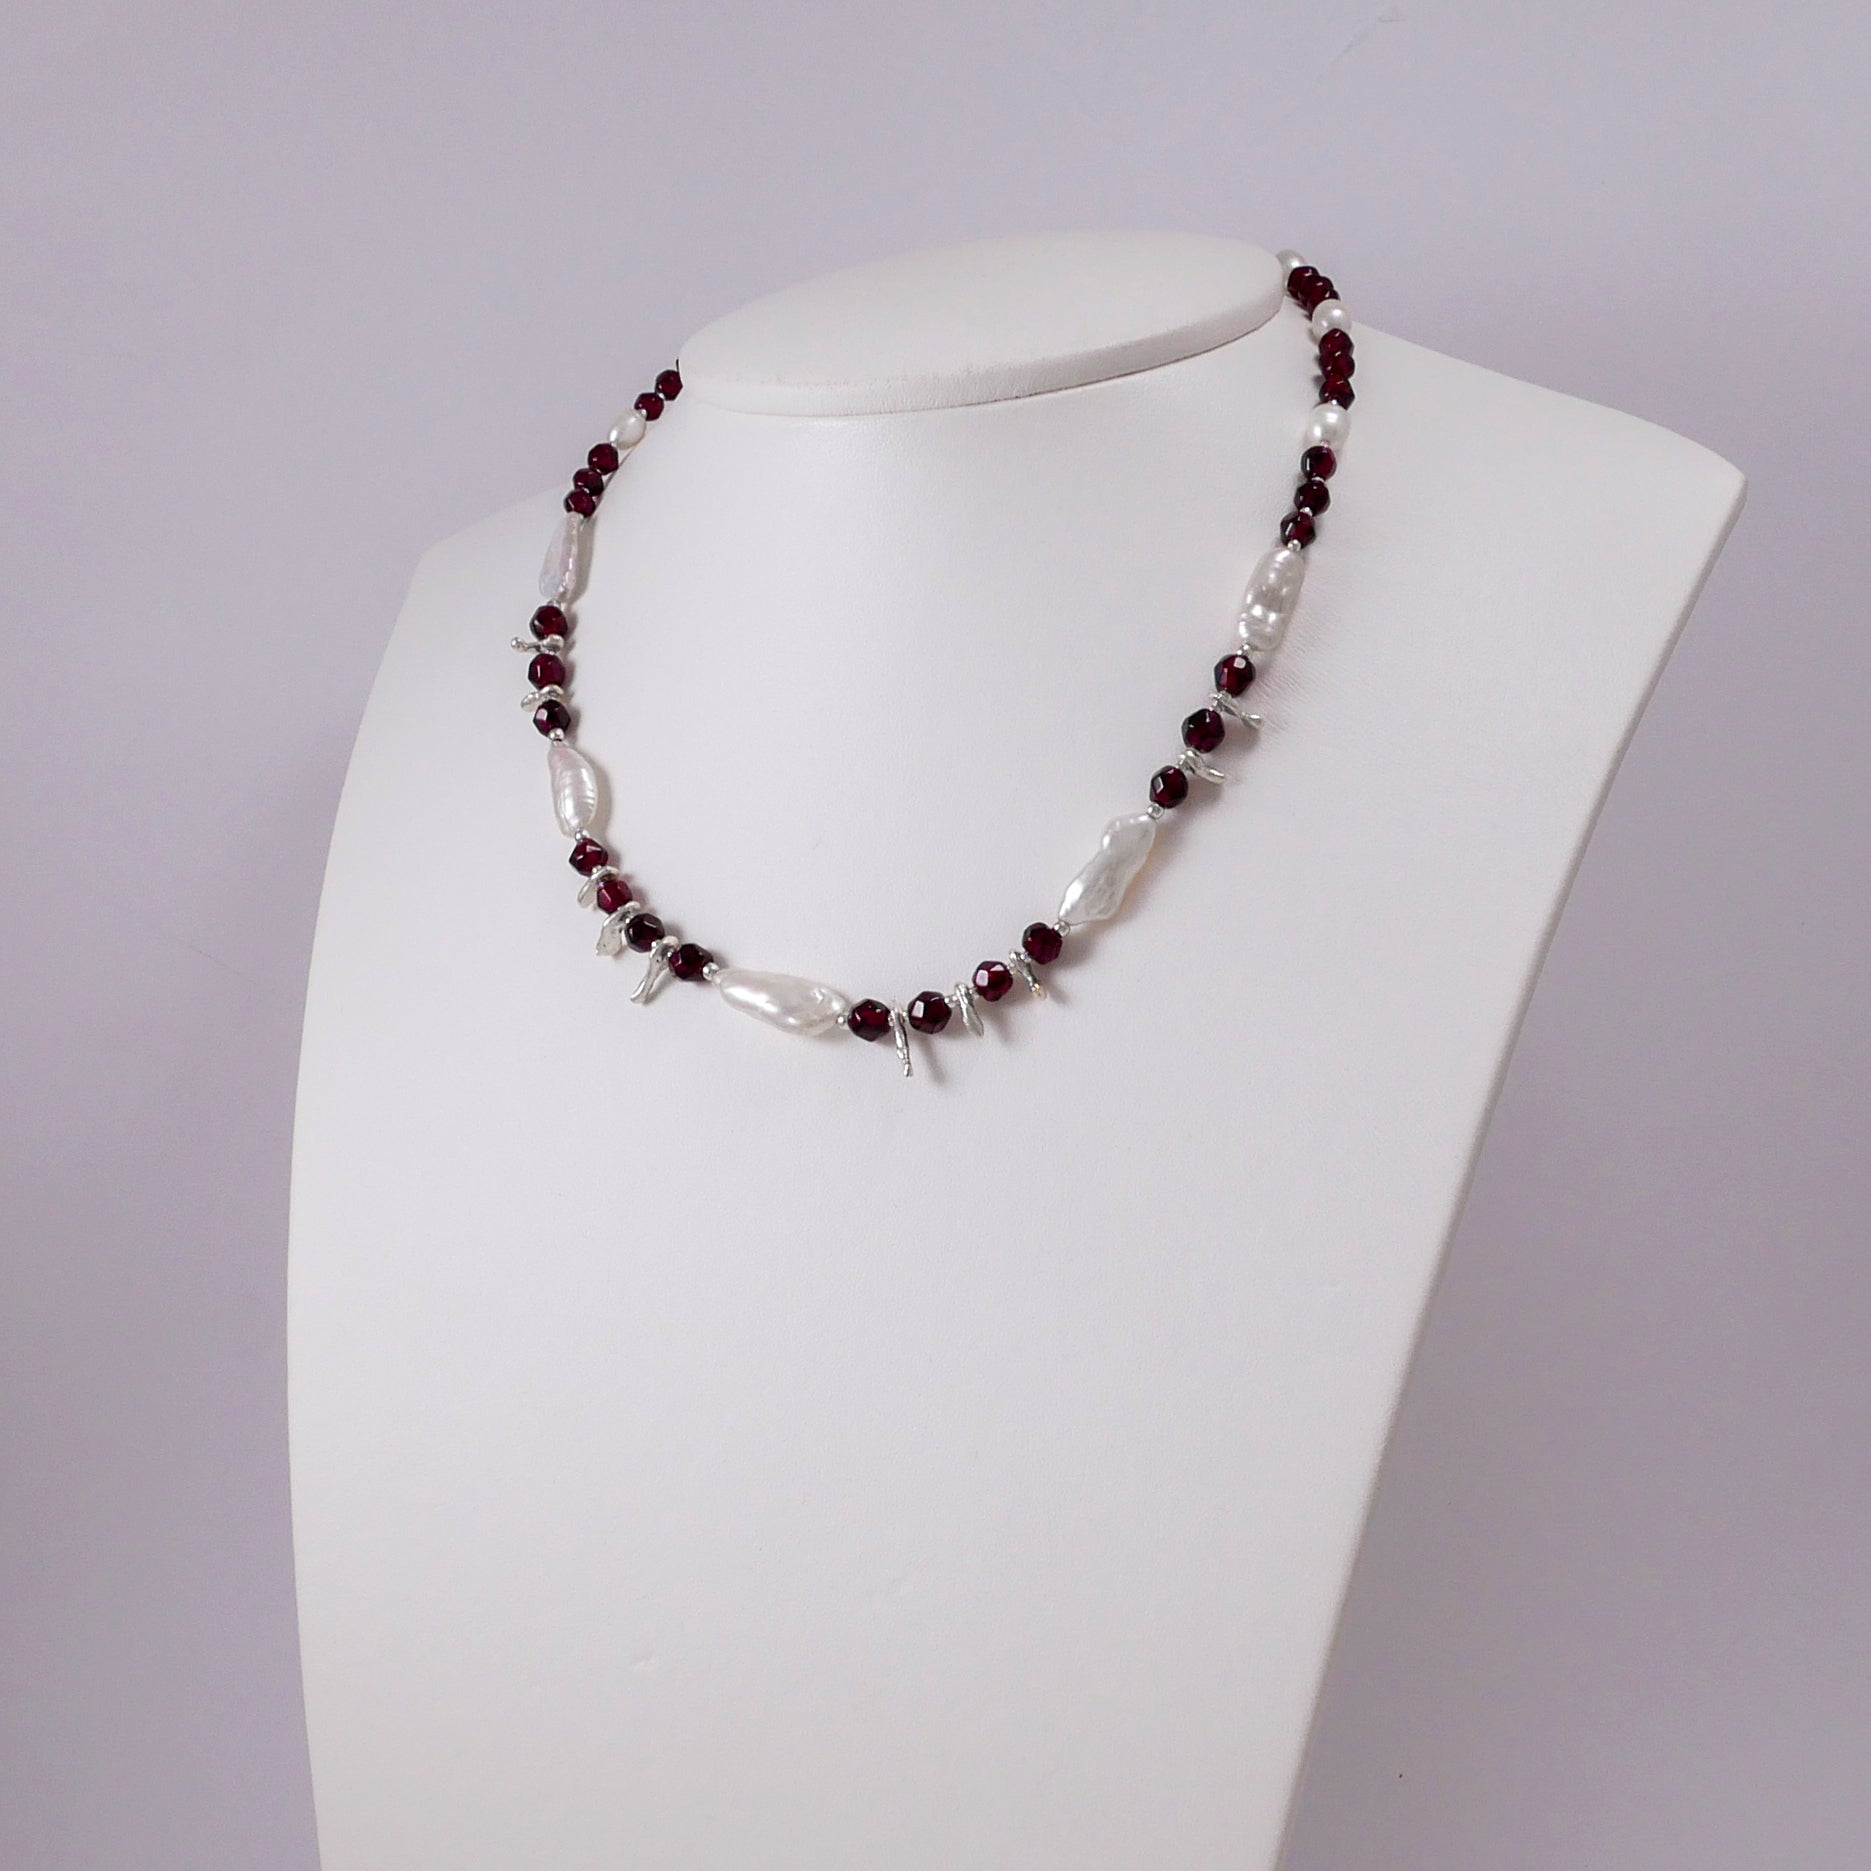 Faceted Garnets, Pearls, and Sterling Silver Necklace - Katerina Roukouna